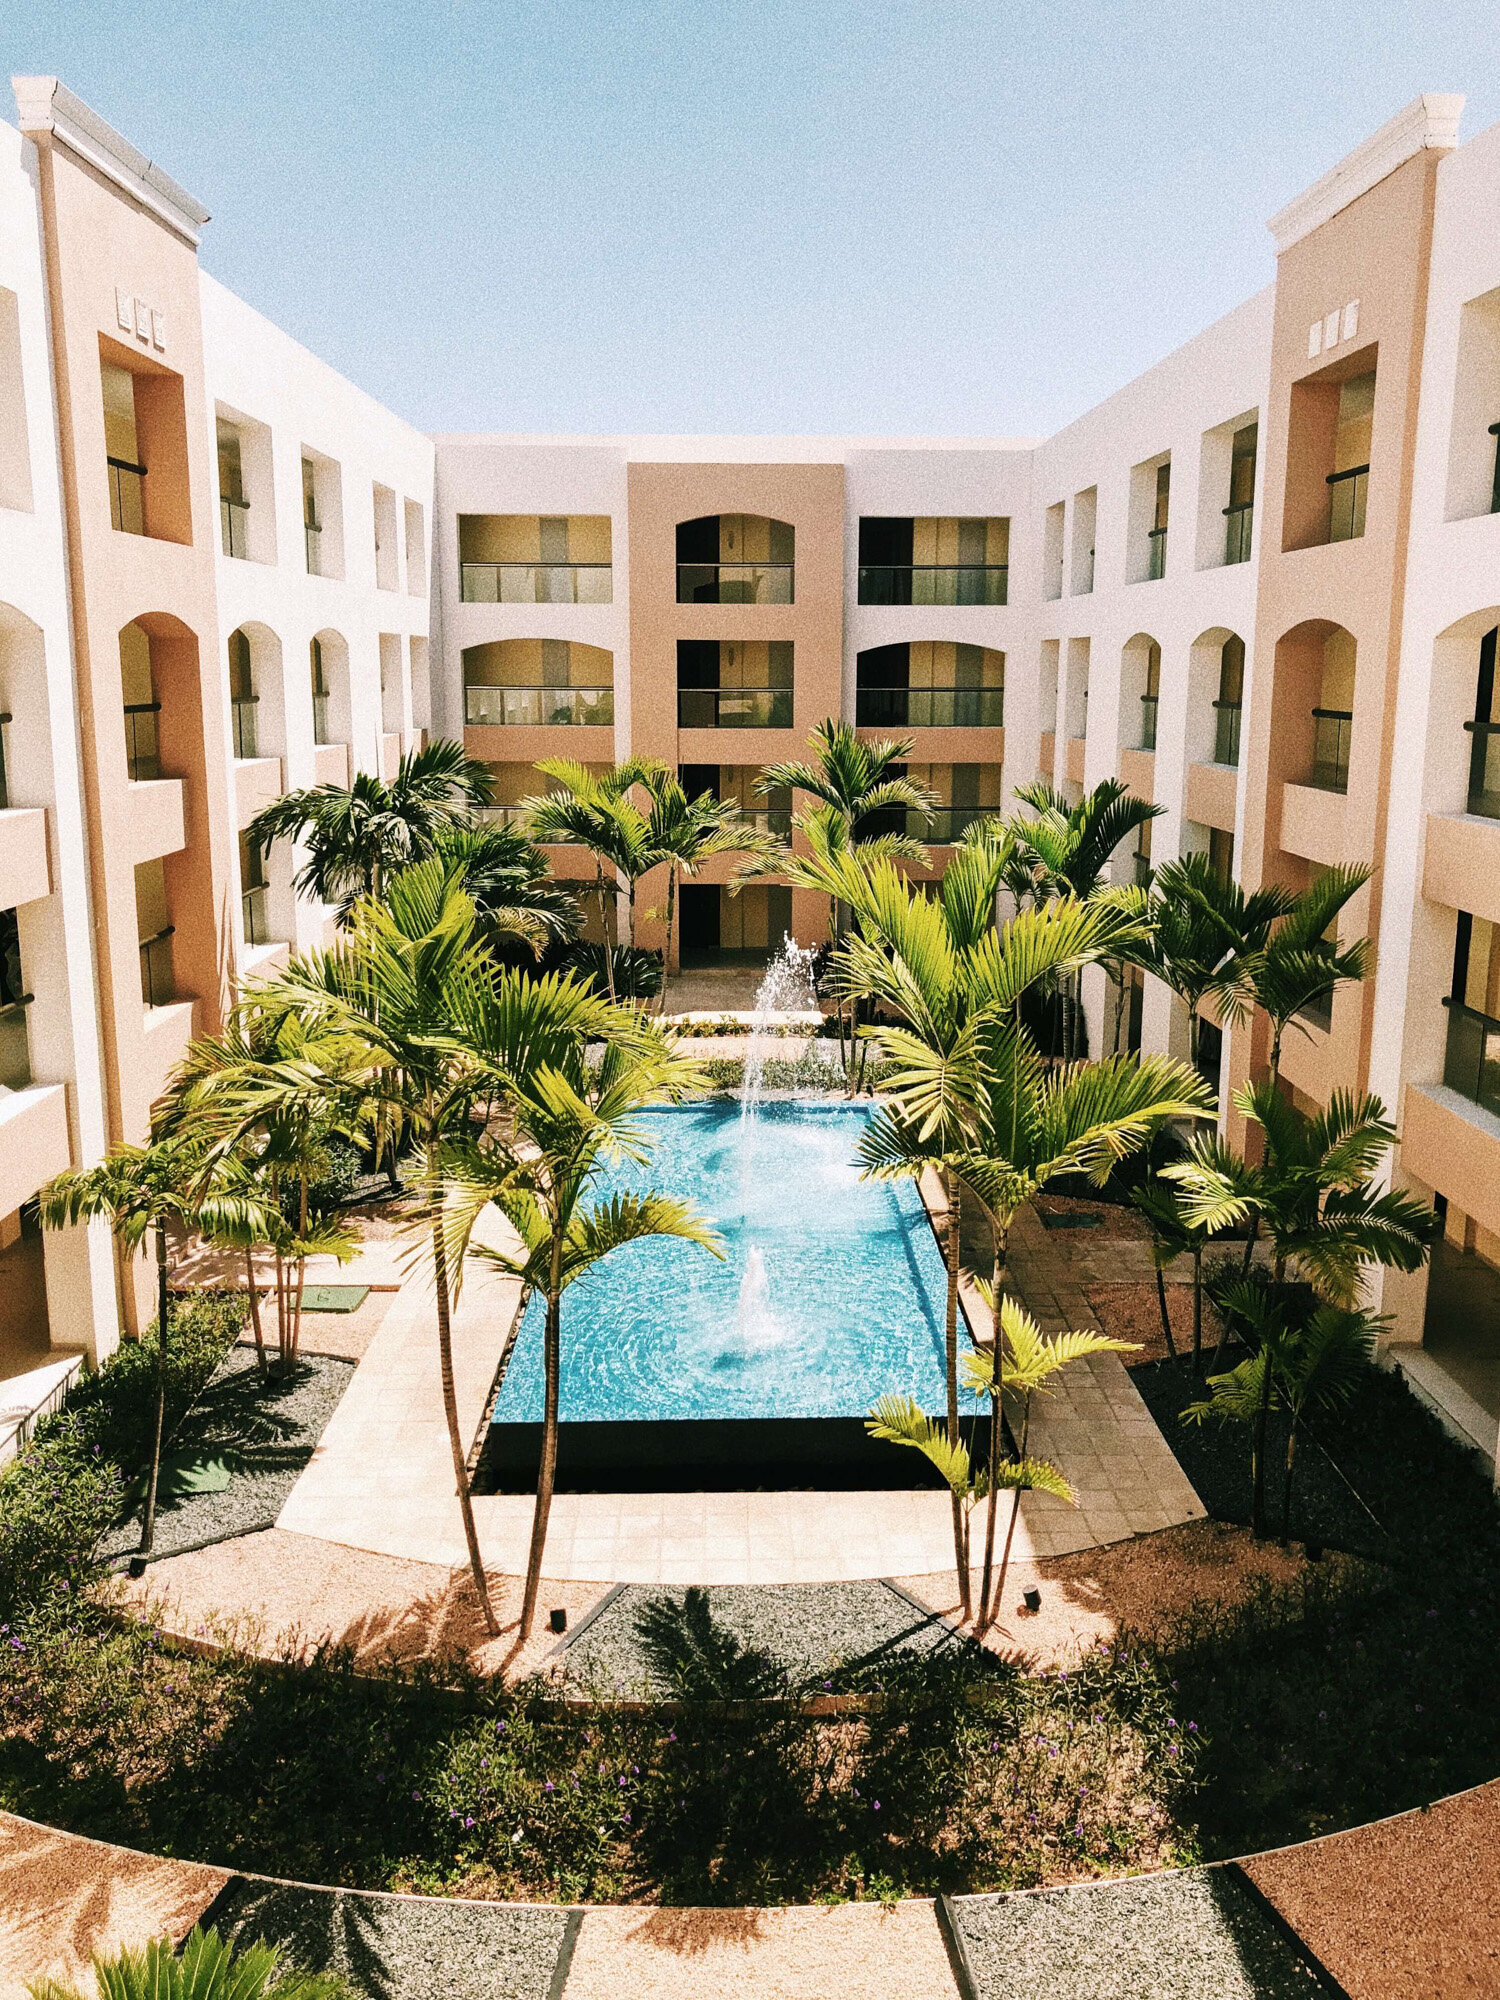 Beach resort that has a swimming pool in between their room building